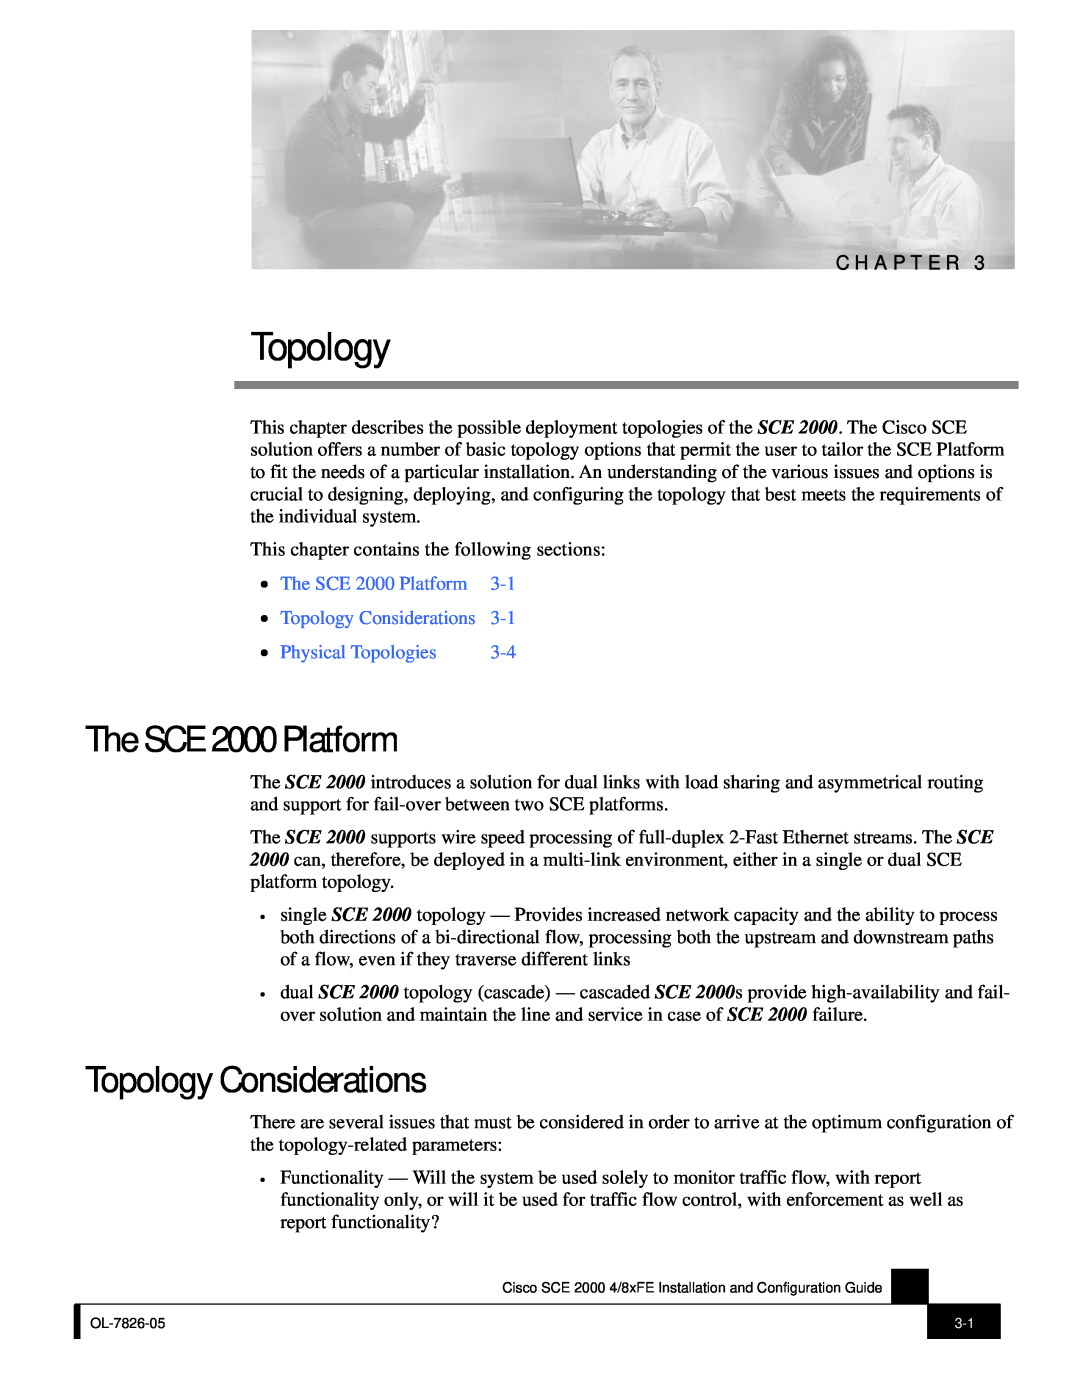 Cisco Systems SCE 2000 4/8xFE manual The SCE 2000 Platform, Topology Considerations, Physical Topologies, C H A P T E R 